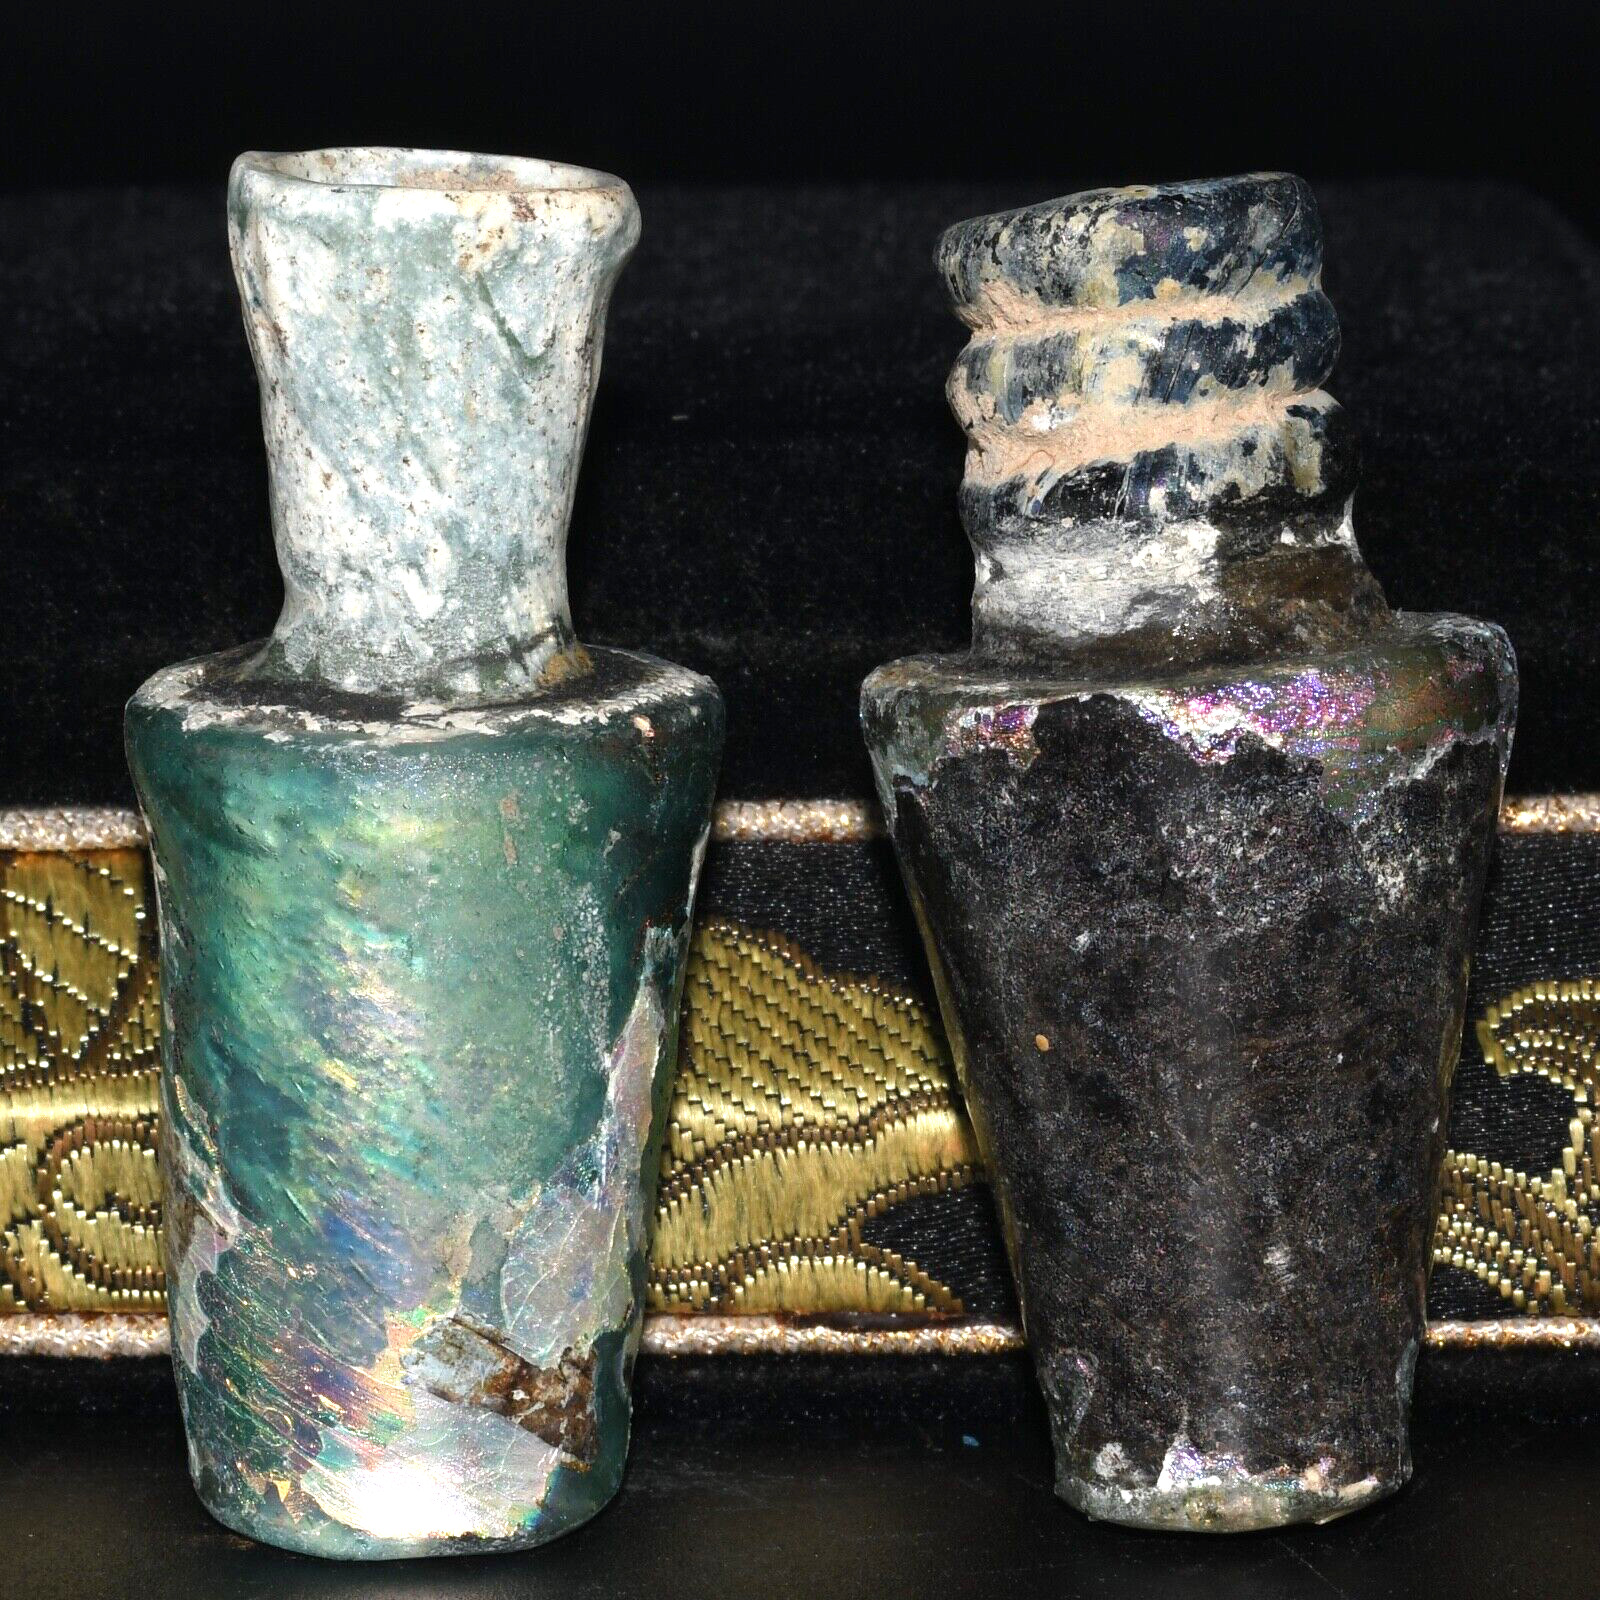 2 Genuine Ancient Roman Glass Bottle Vials With Iridescent Patina 1st Century AD